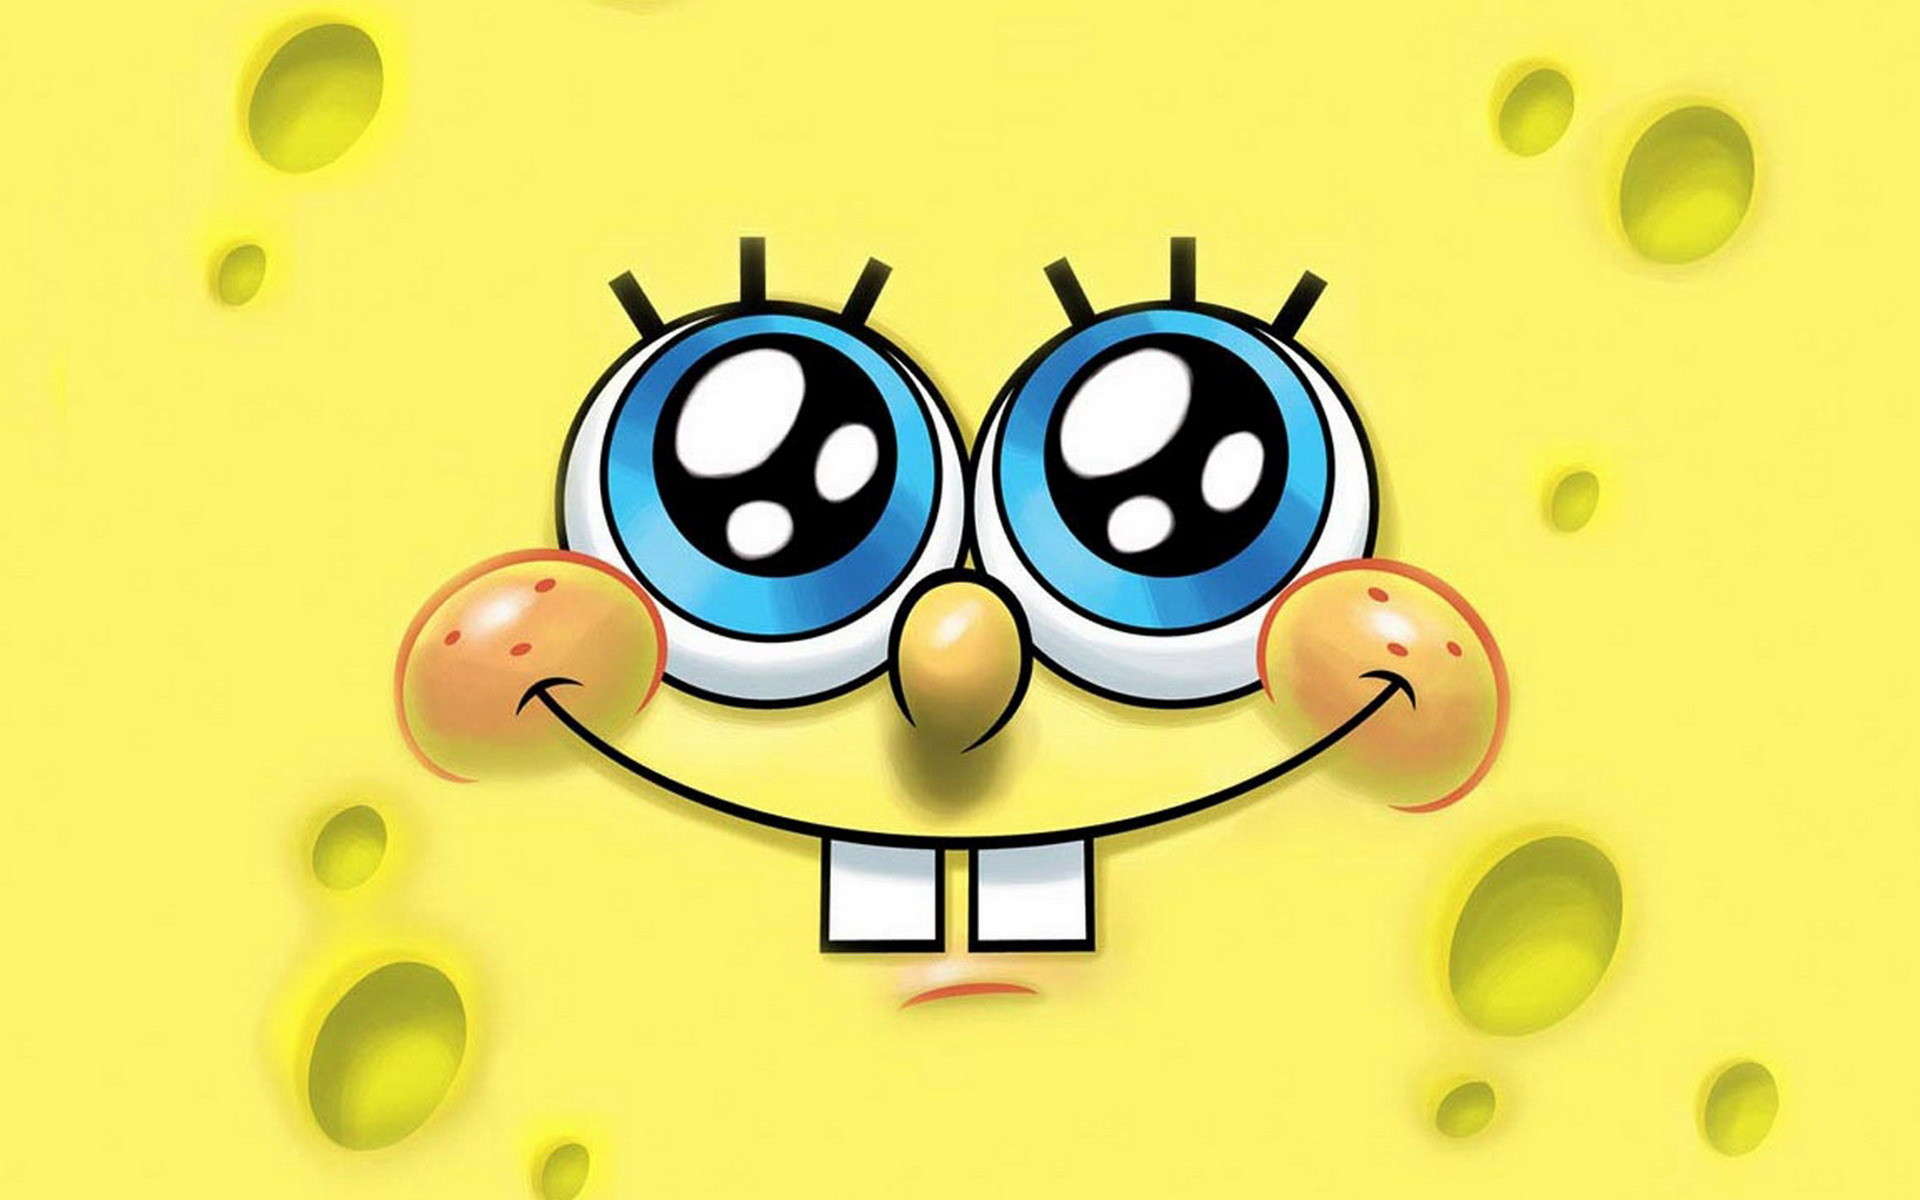 TIL that Spongebob's smile is made from 2 faces that are eating a ...